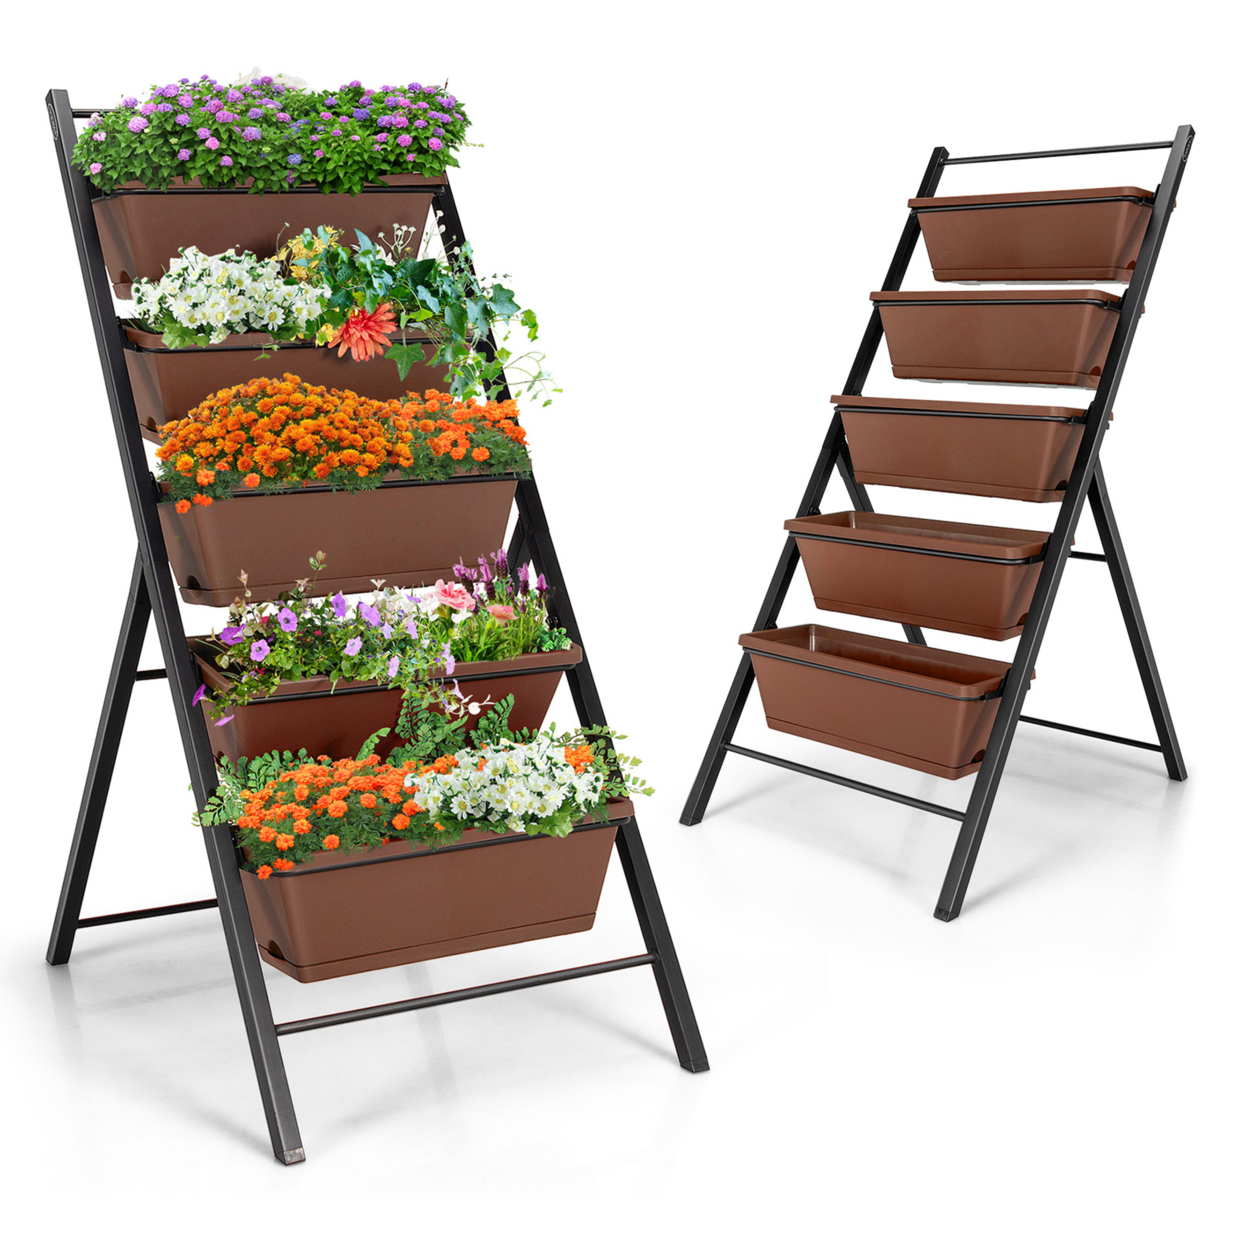 2PCS 5-Tier Vertical Raised Garden Bed Elevated Planter 5 Container Box - Brown